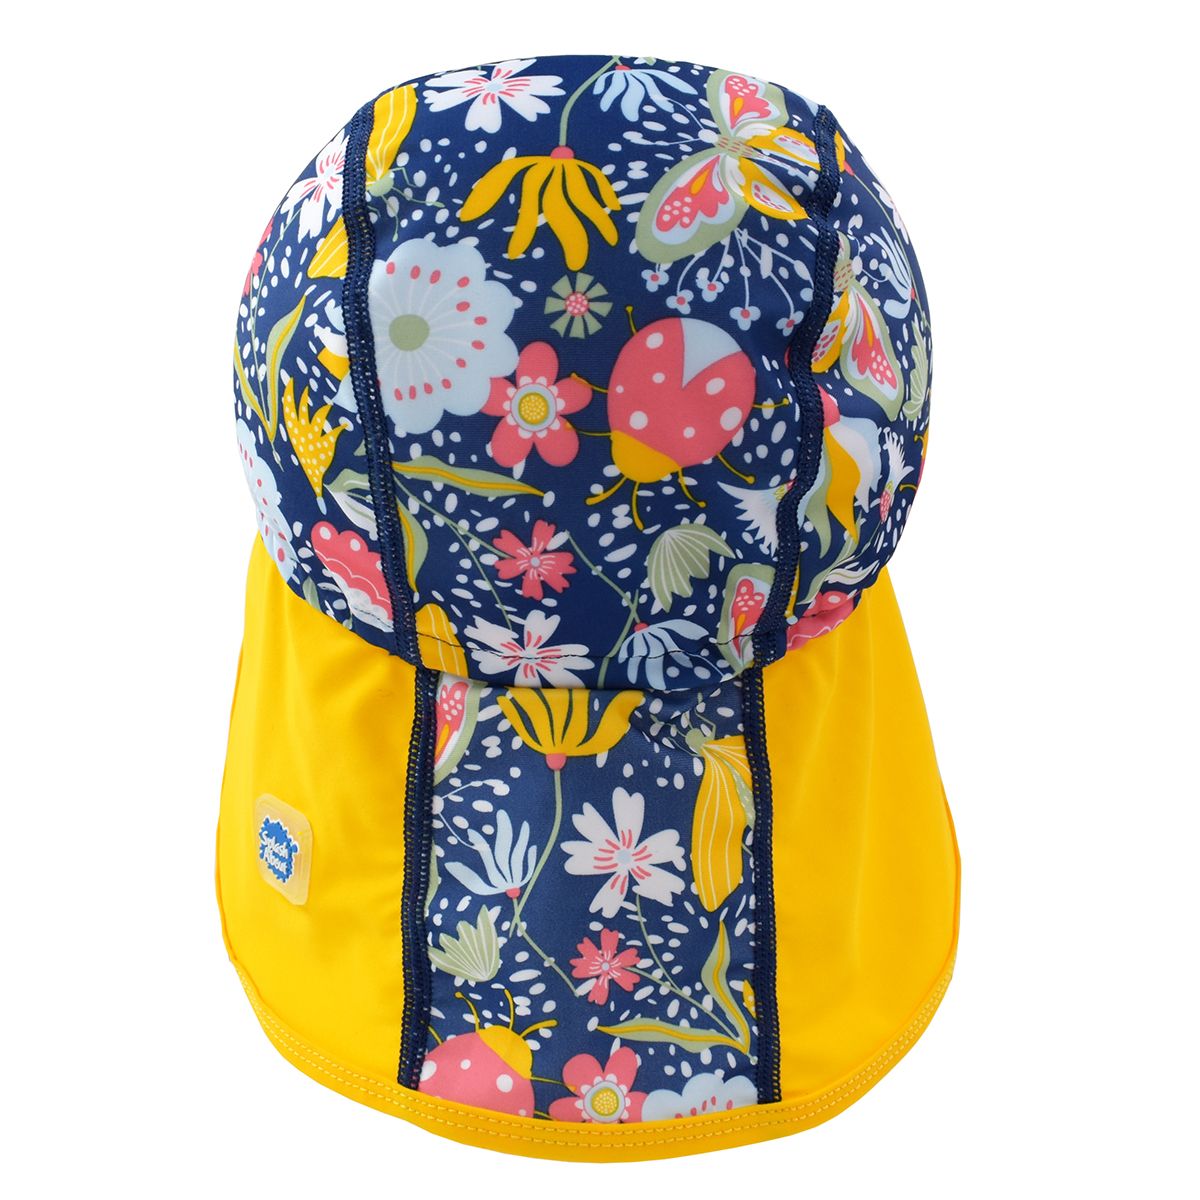 Legionnaire style sun hat in navy blue, with yellow trims and floral print panel . Back.